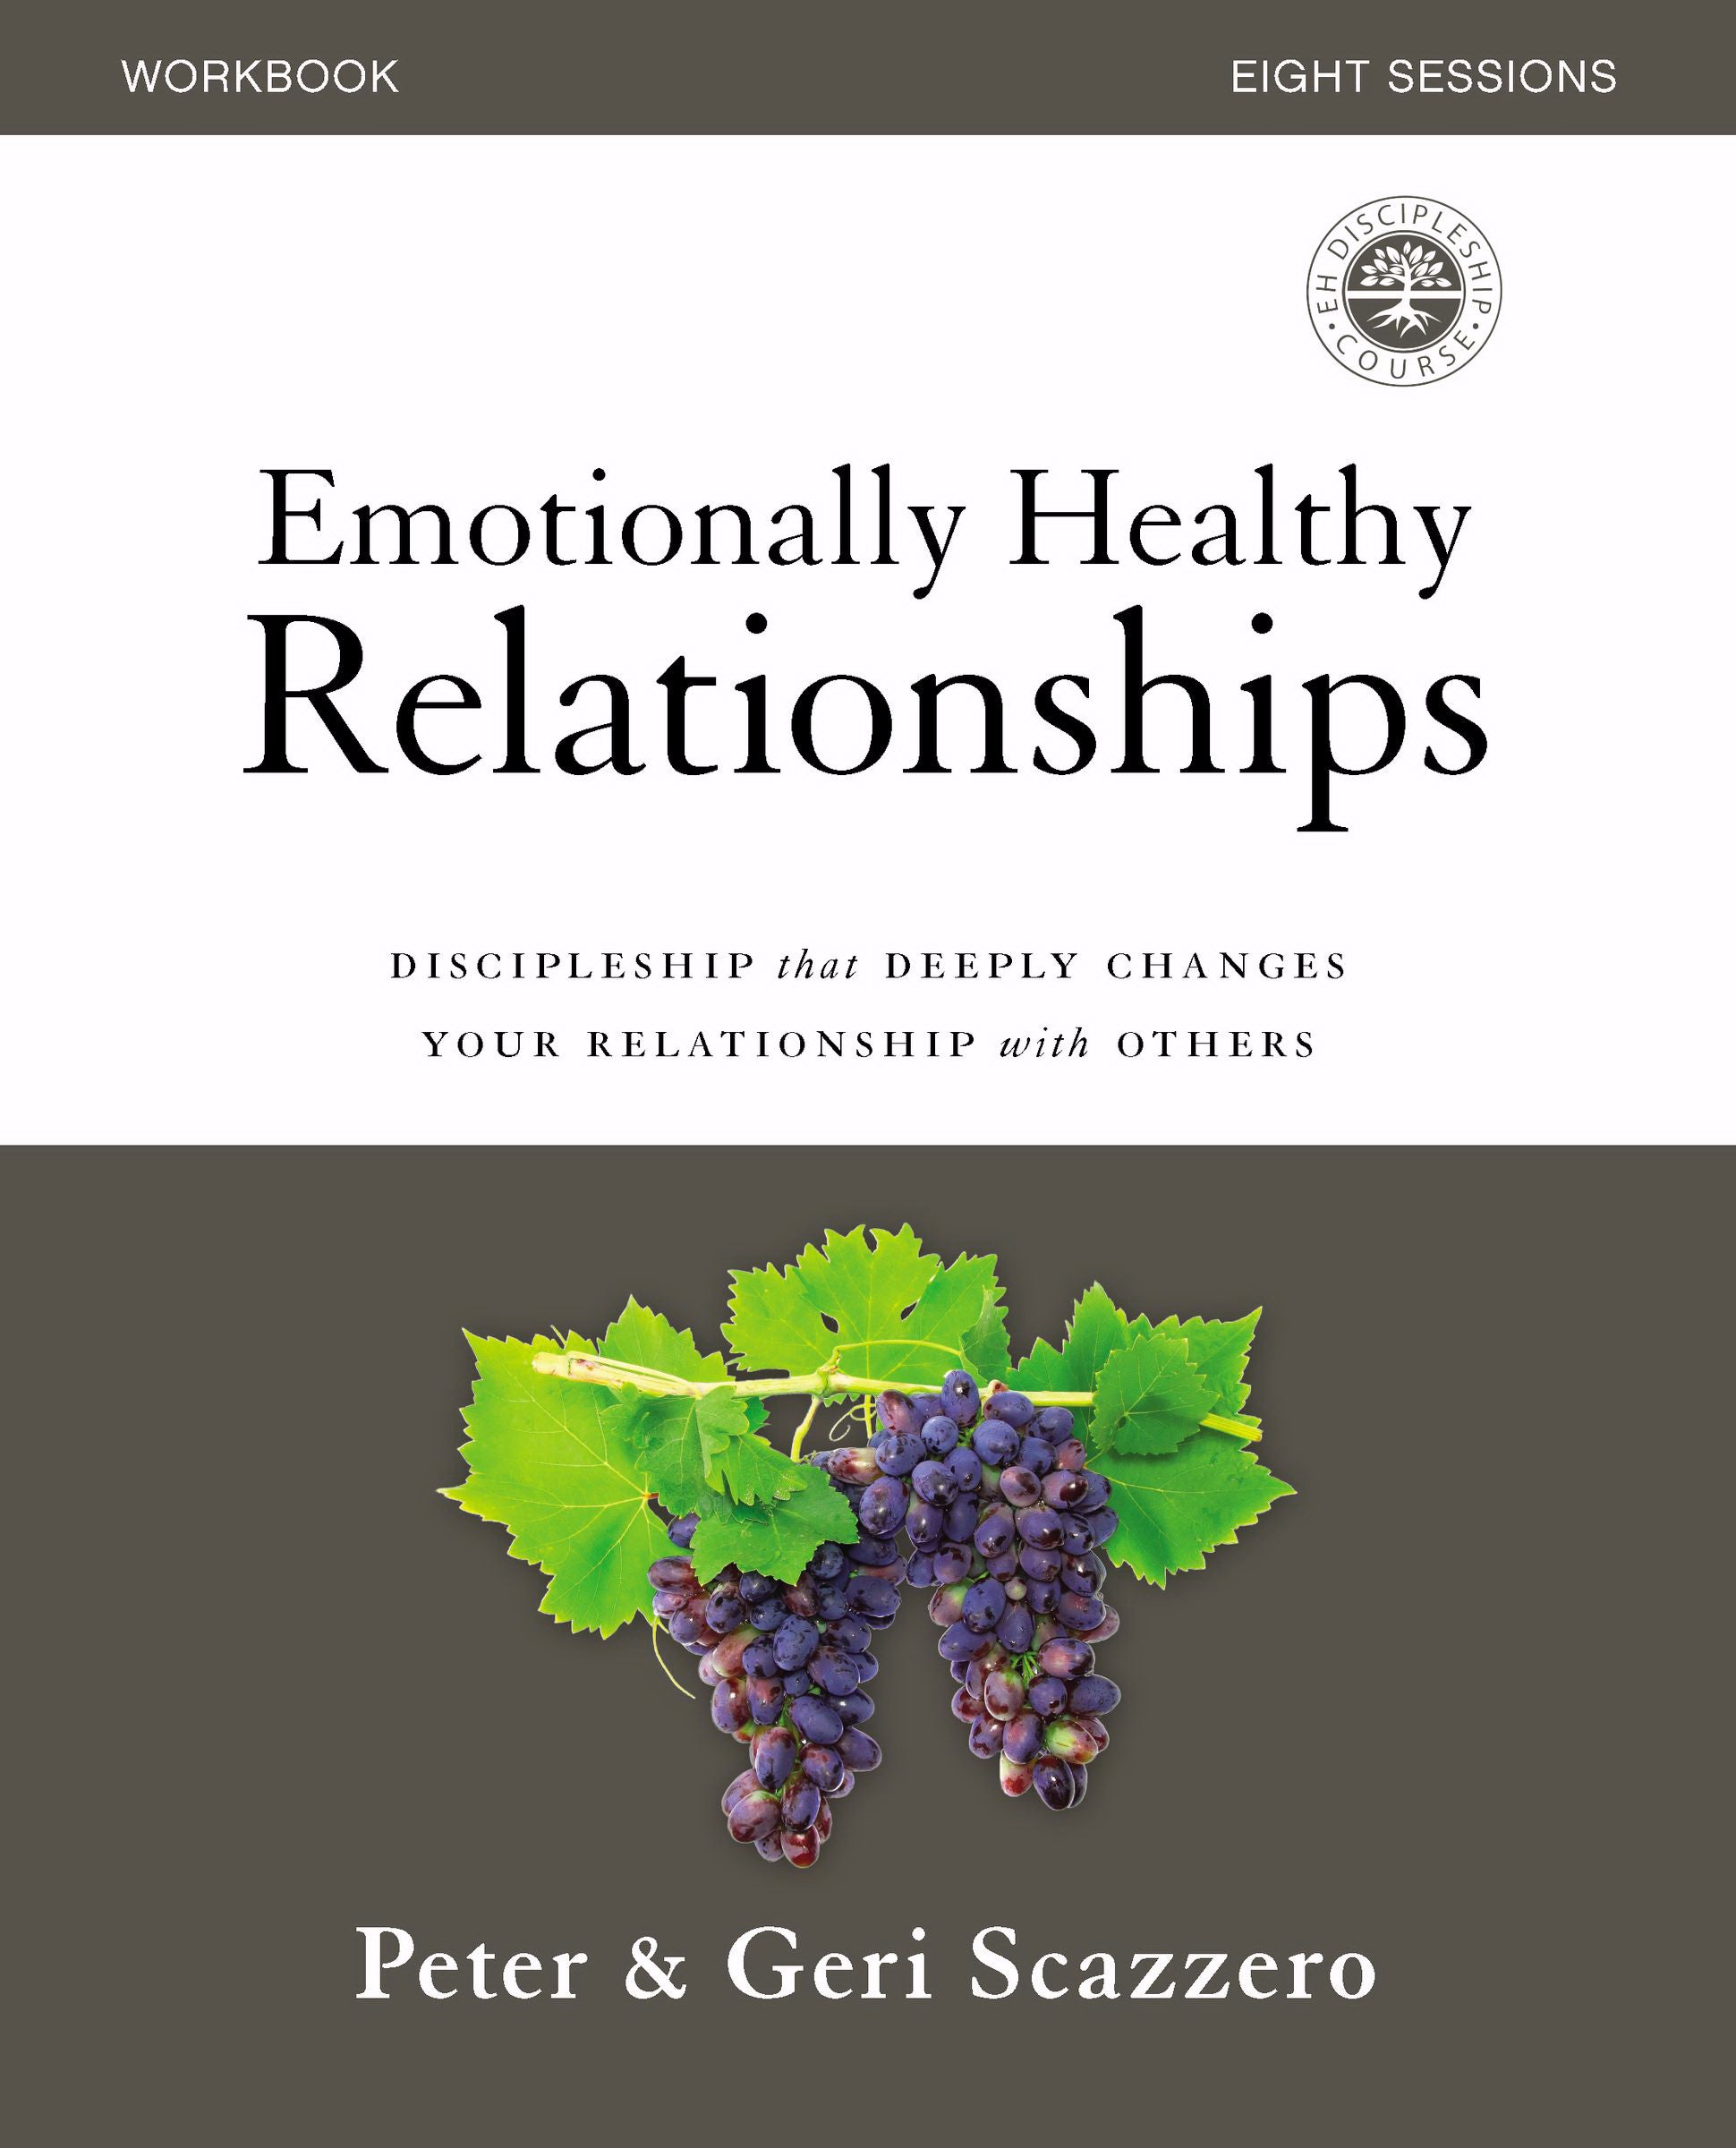 Image of Emotionally Healthy Relationships Workbook other